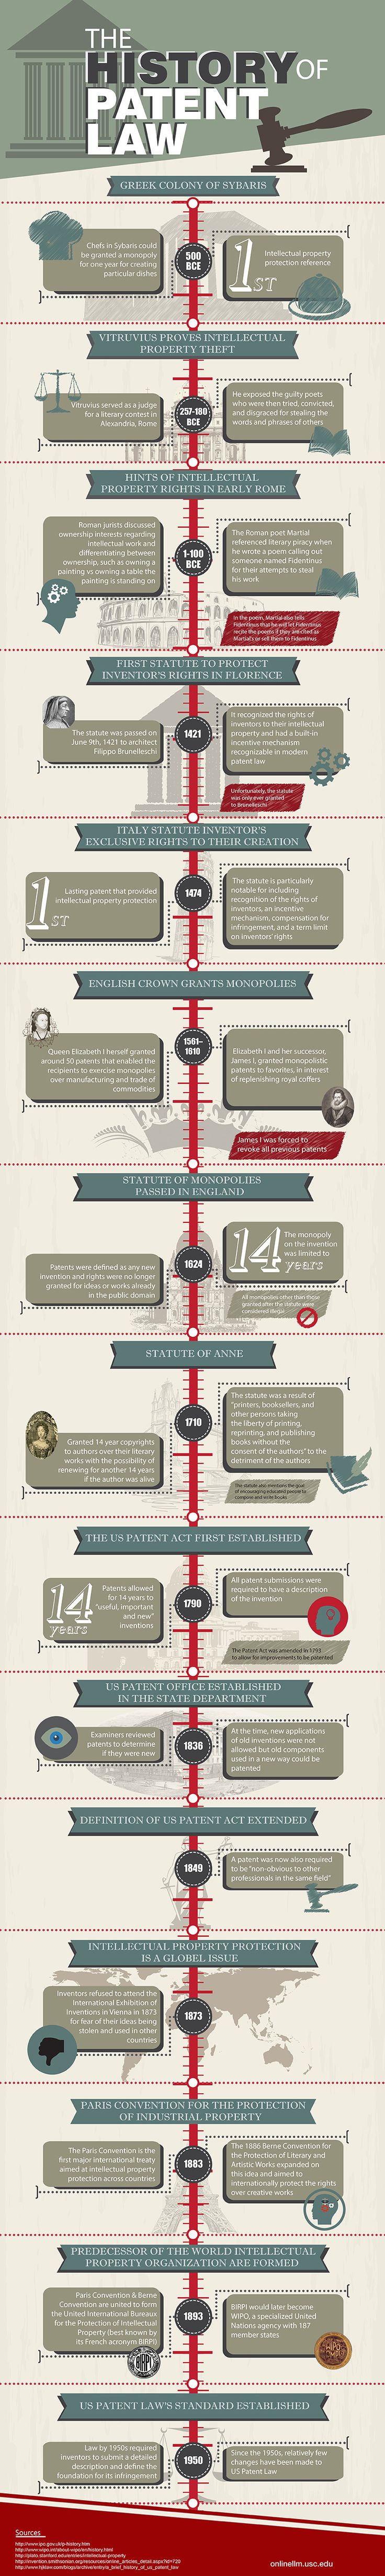 History of Patent Law